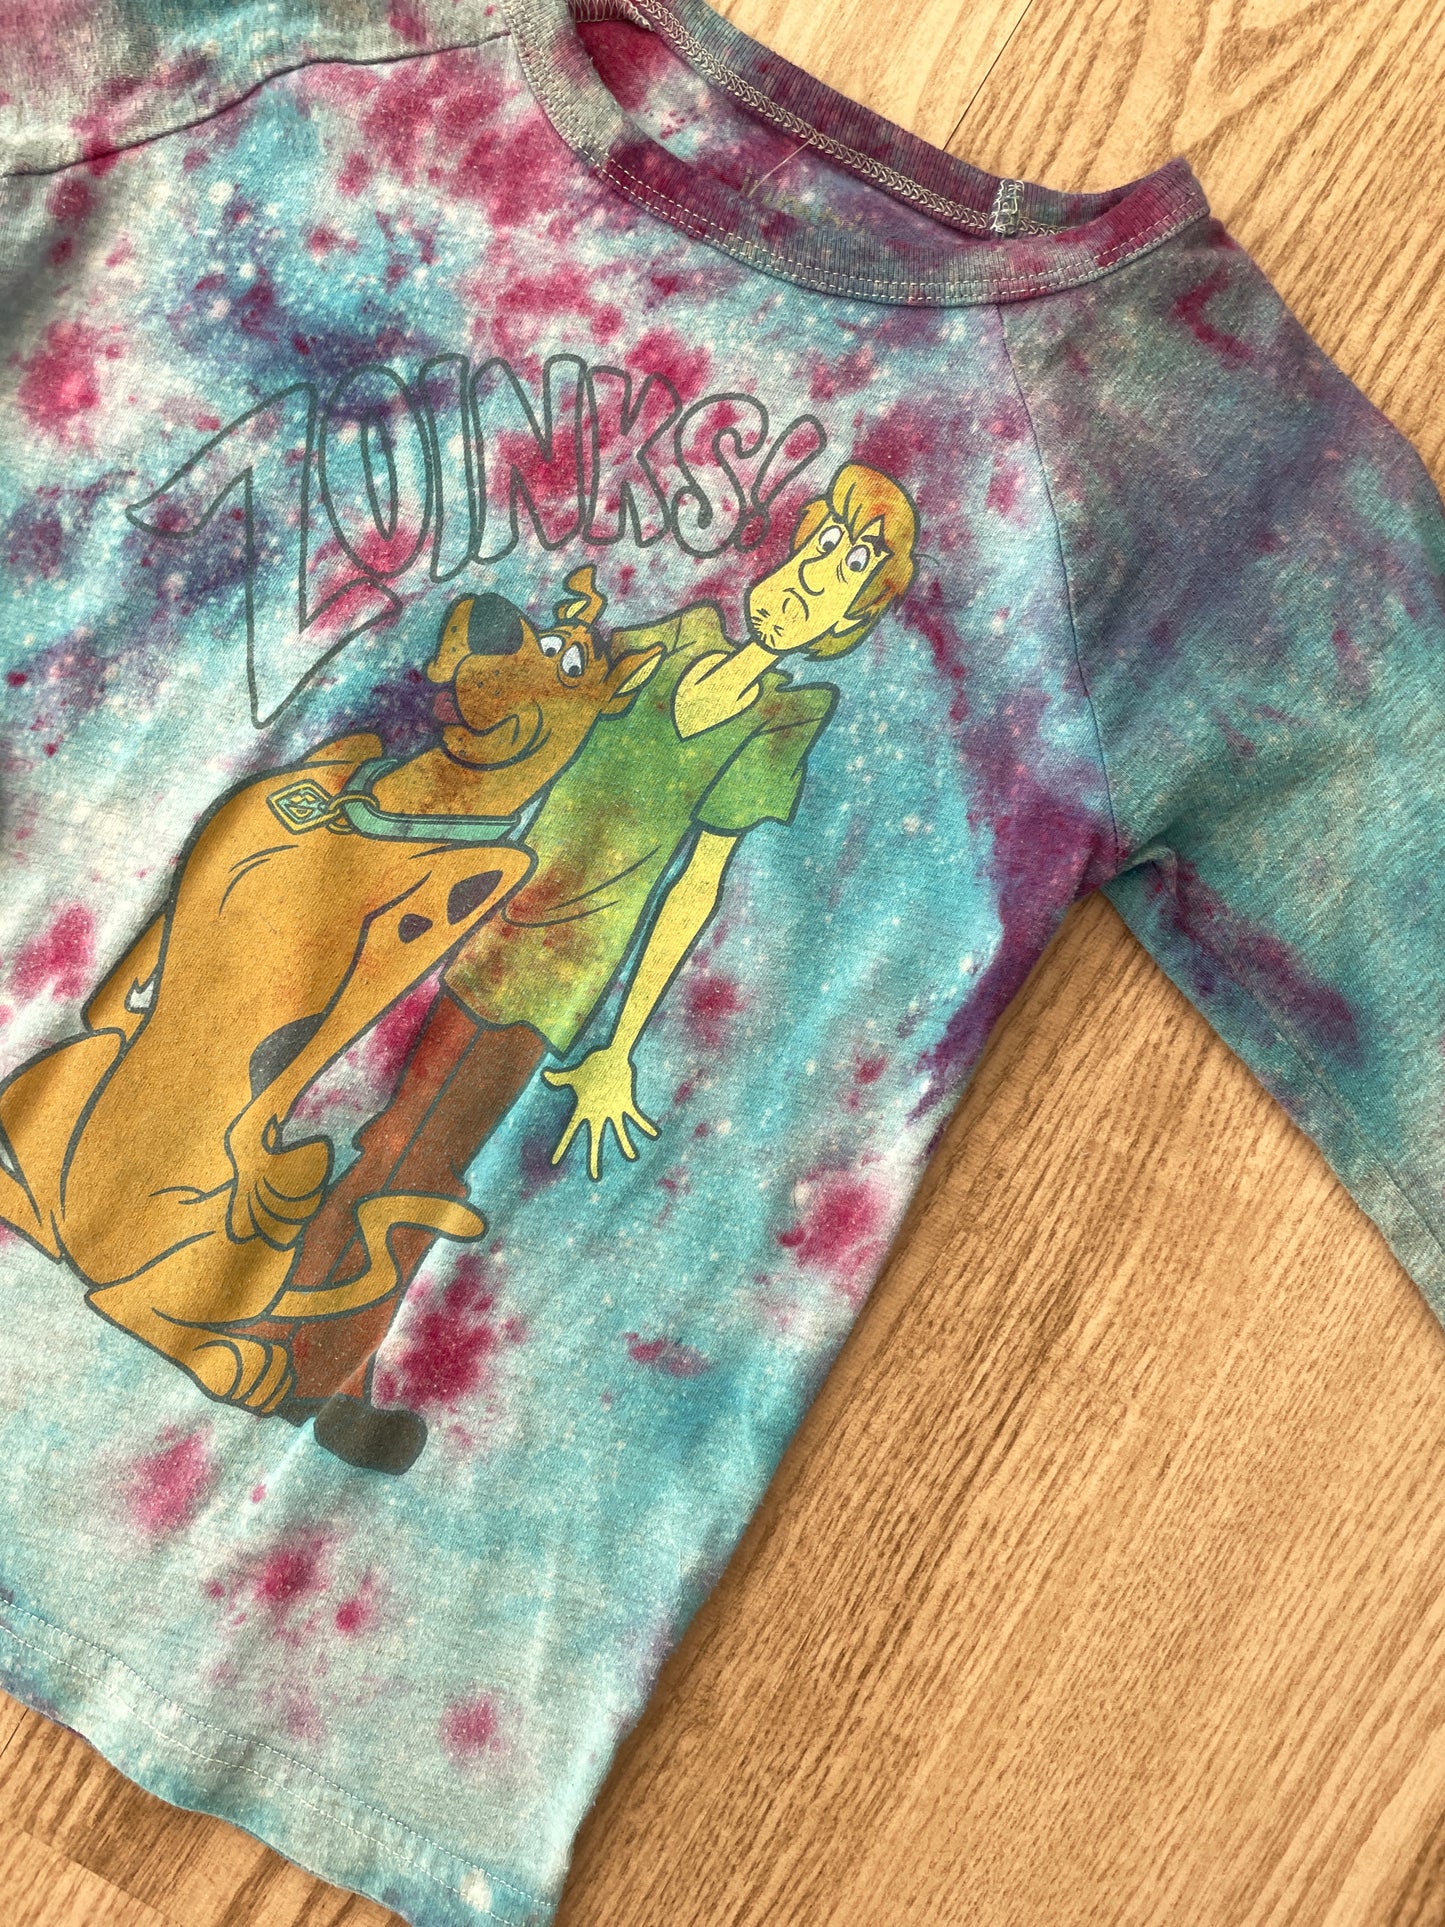 Youth Size 5 Scoobie Doo ZOINKS Handmade Galaxy Tie Dye Short Long Sleeve T-Shirt | One-Of-a-Kind Upcycled Blue and Pink Ice Dye Top